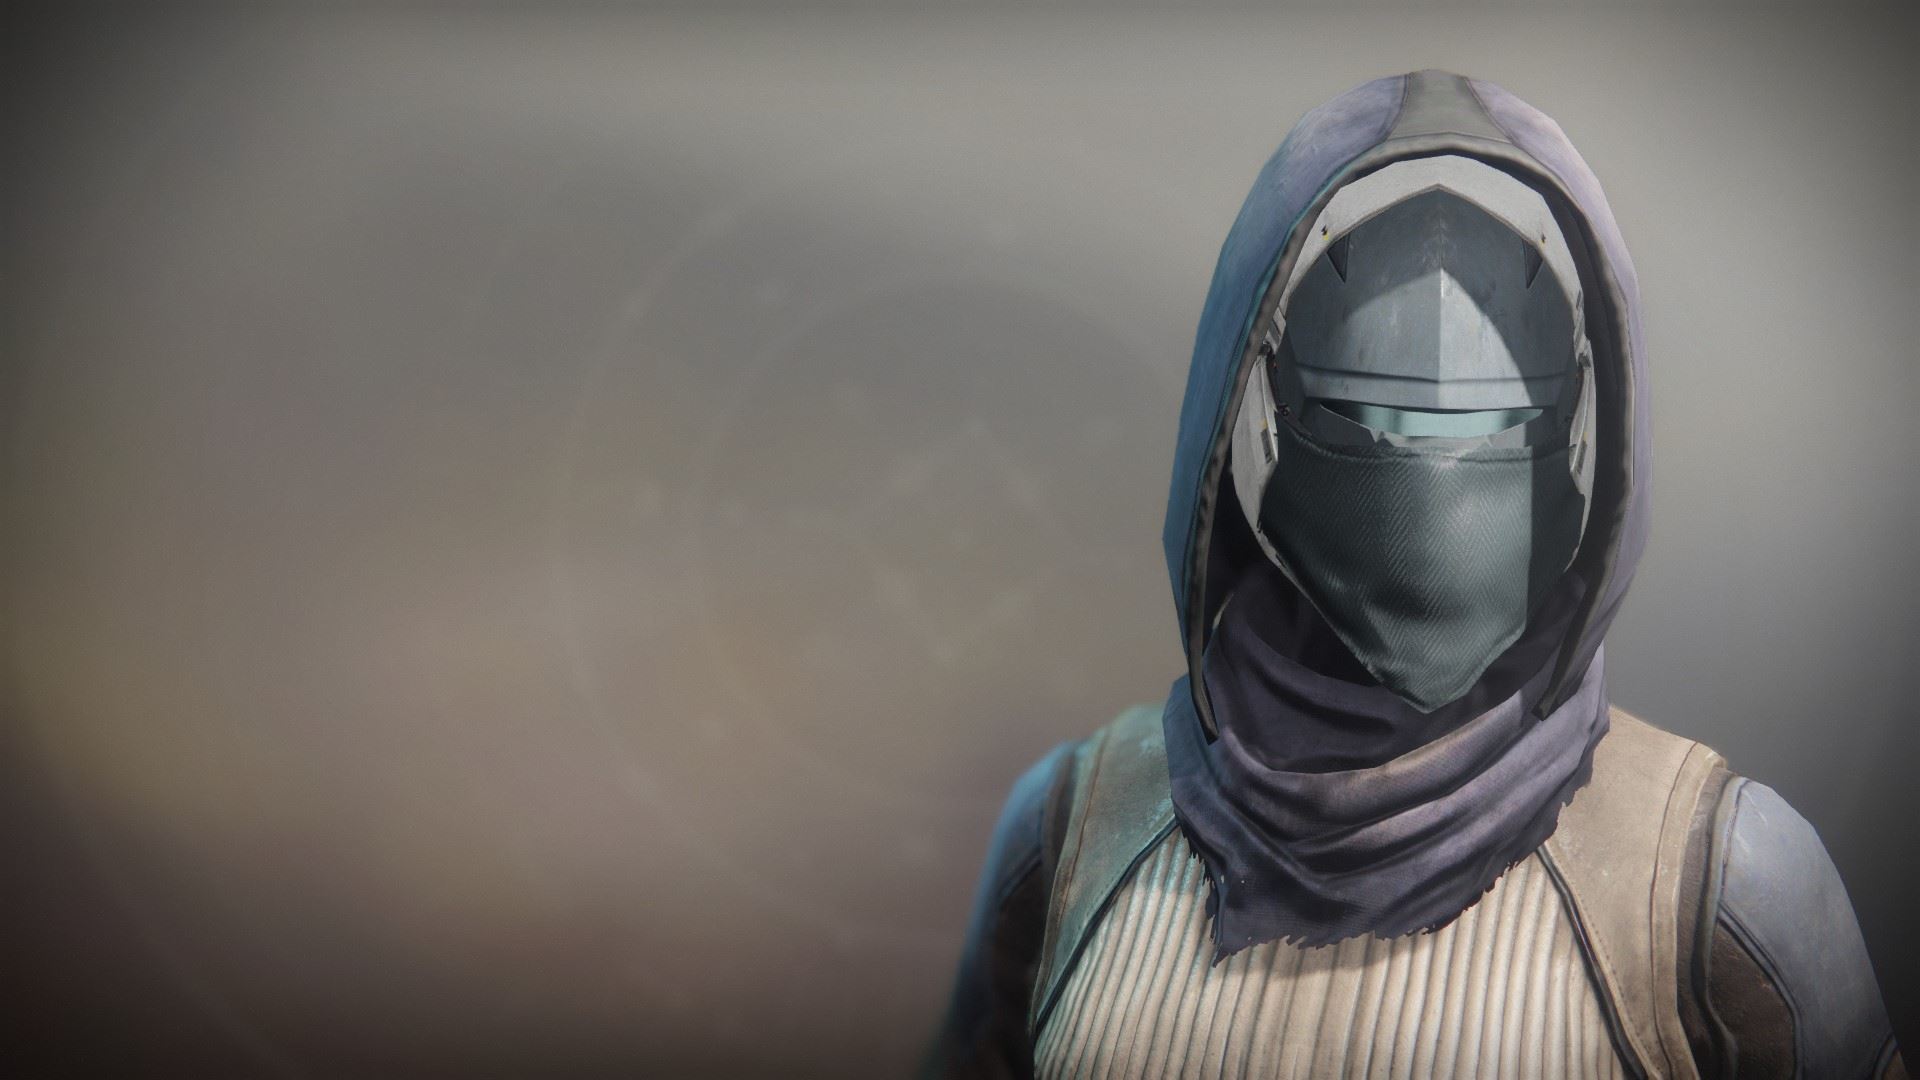 An in-game render of the Solstice Mask (Scorched).